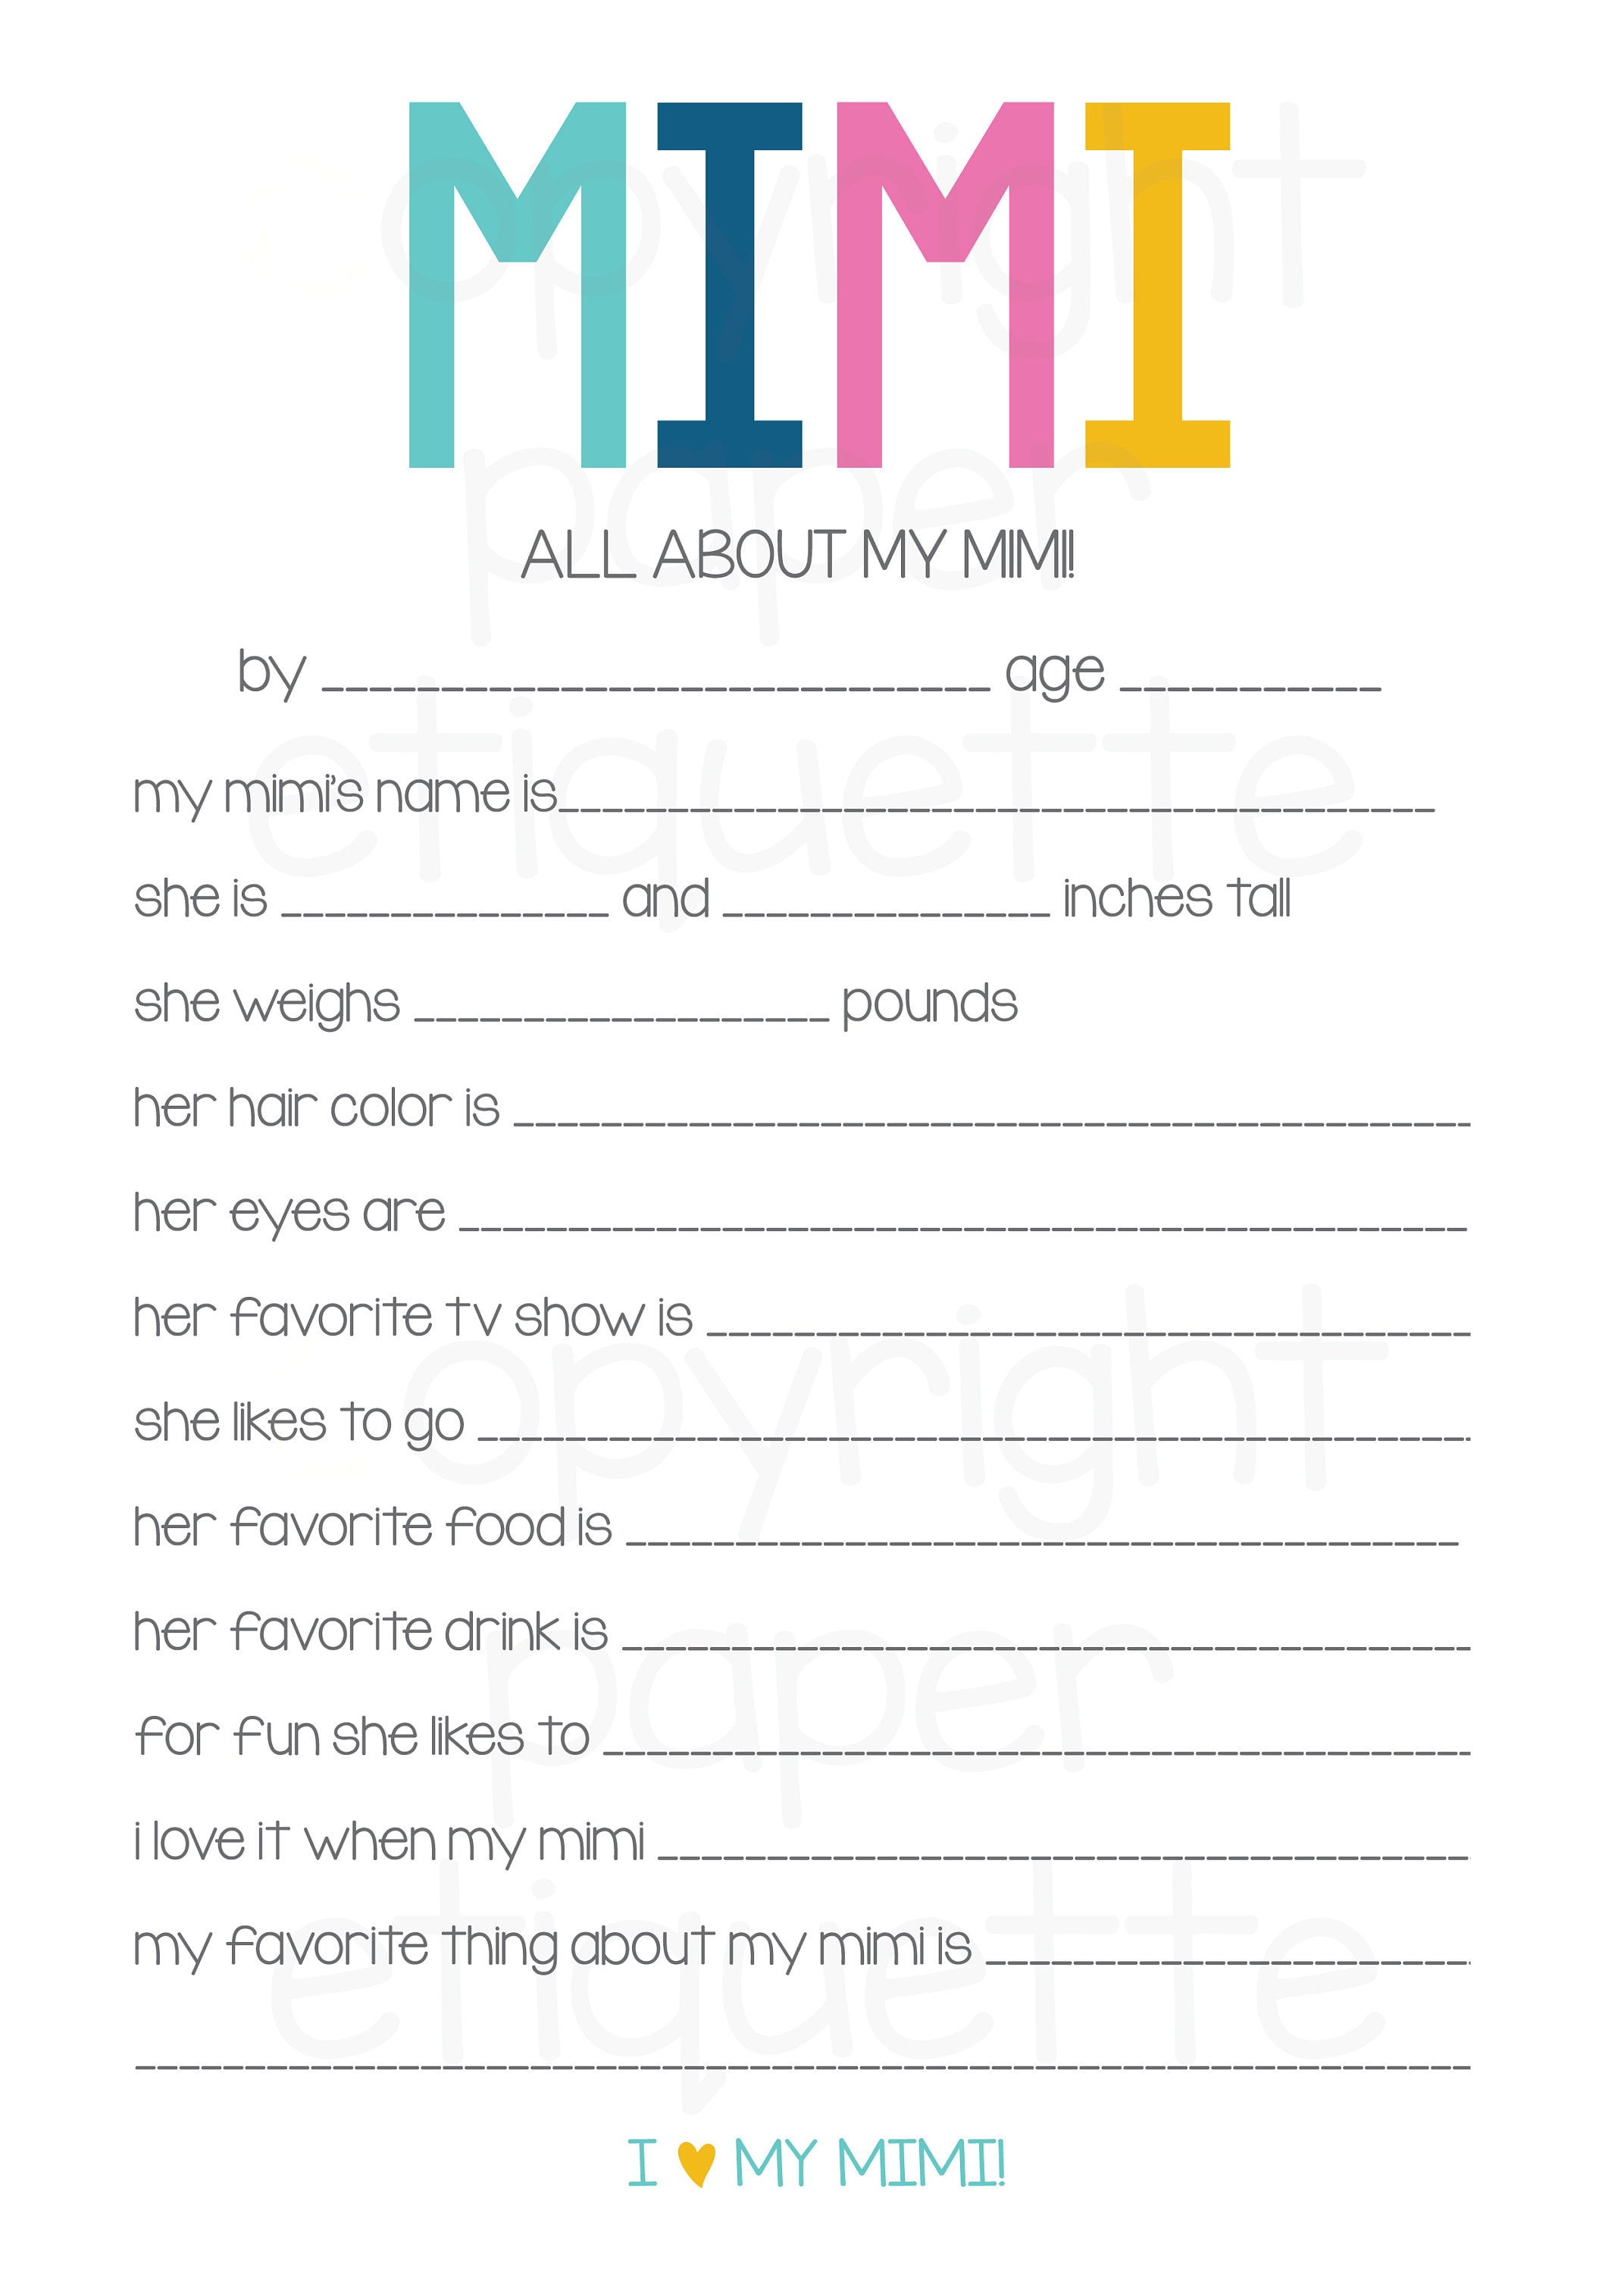 All About My Mimi Printable - Printable Templates